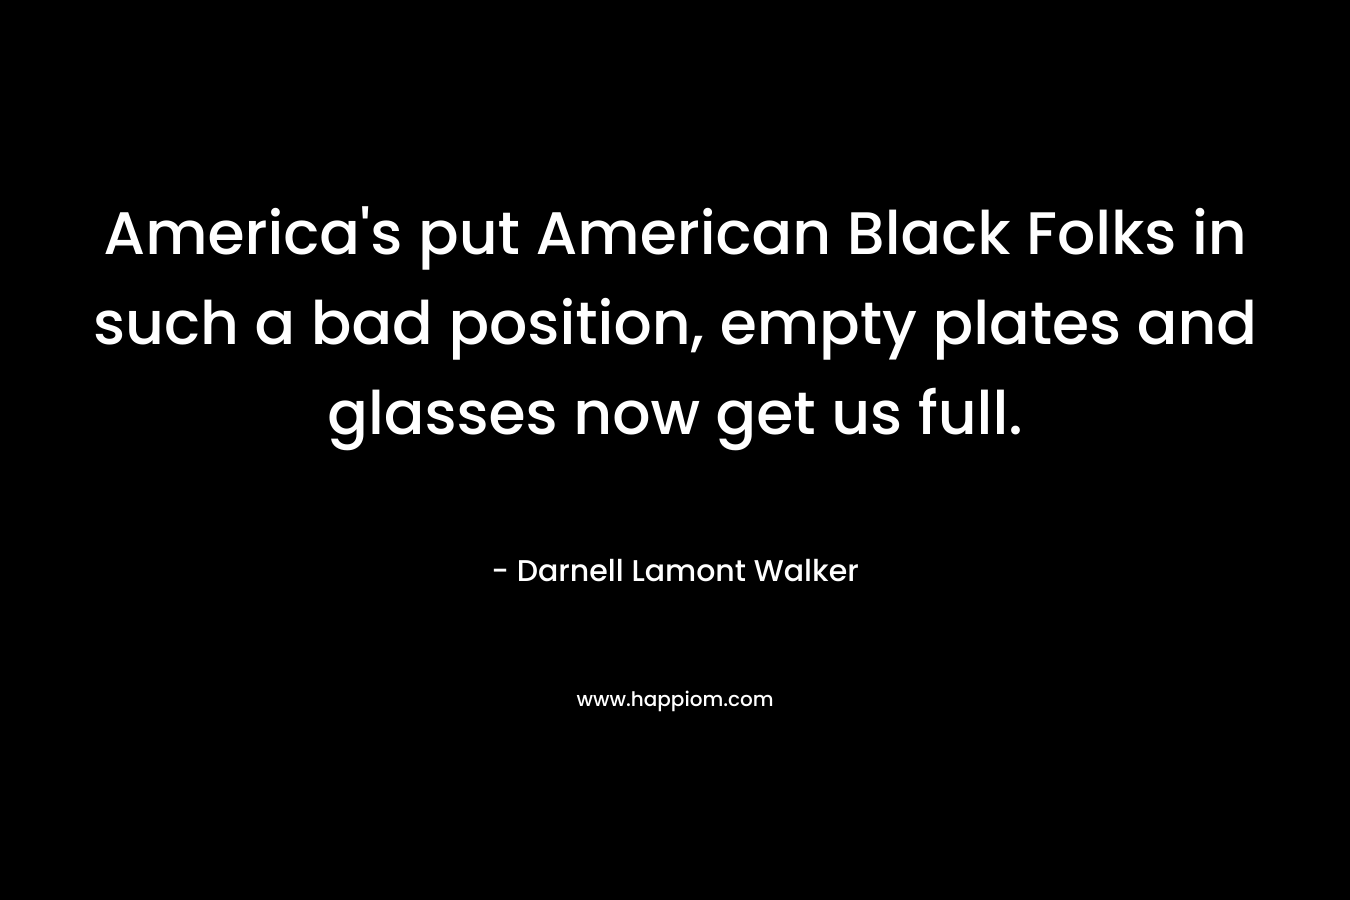 America’s put American Black Folks in such a bad position, empty plates and glasses now get us full. – Darnell Lamont Walker